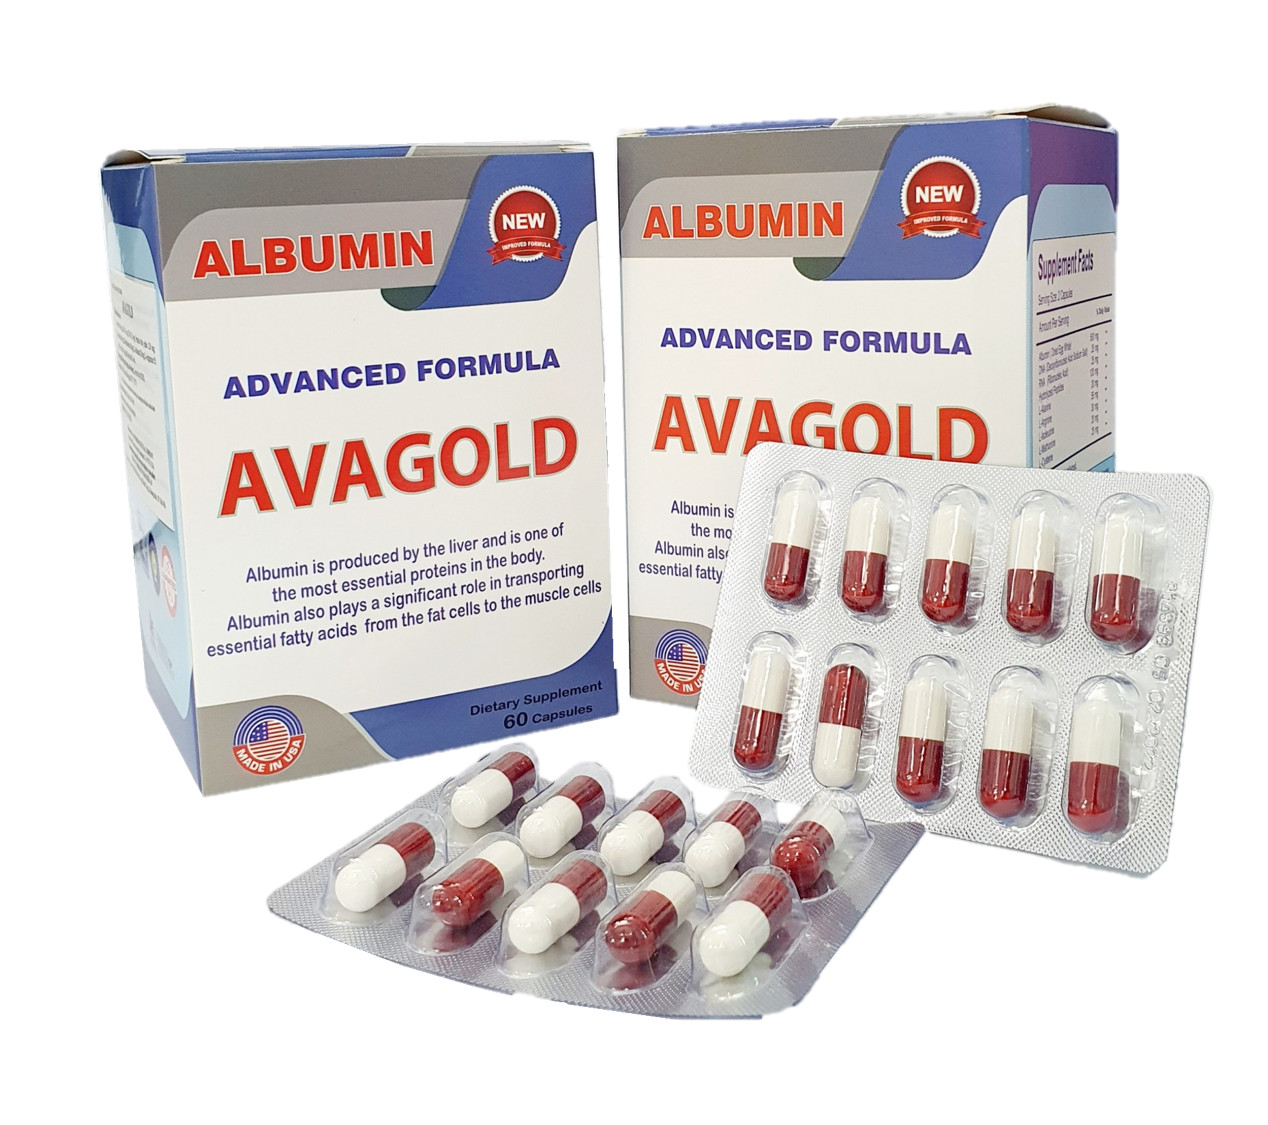 AVAGOLD